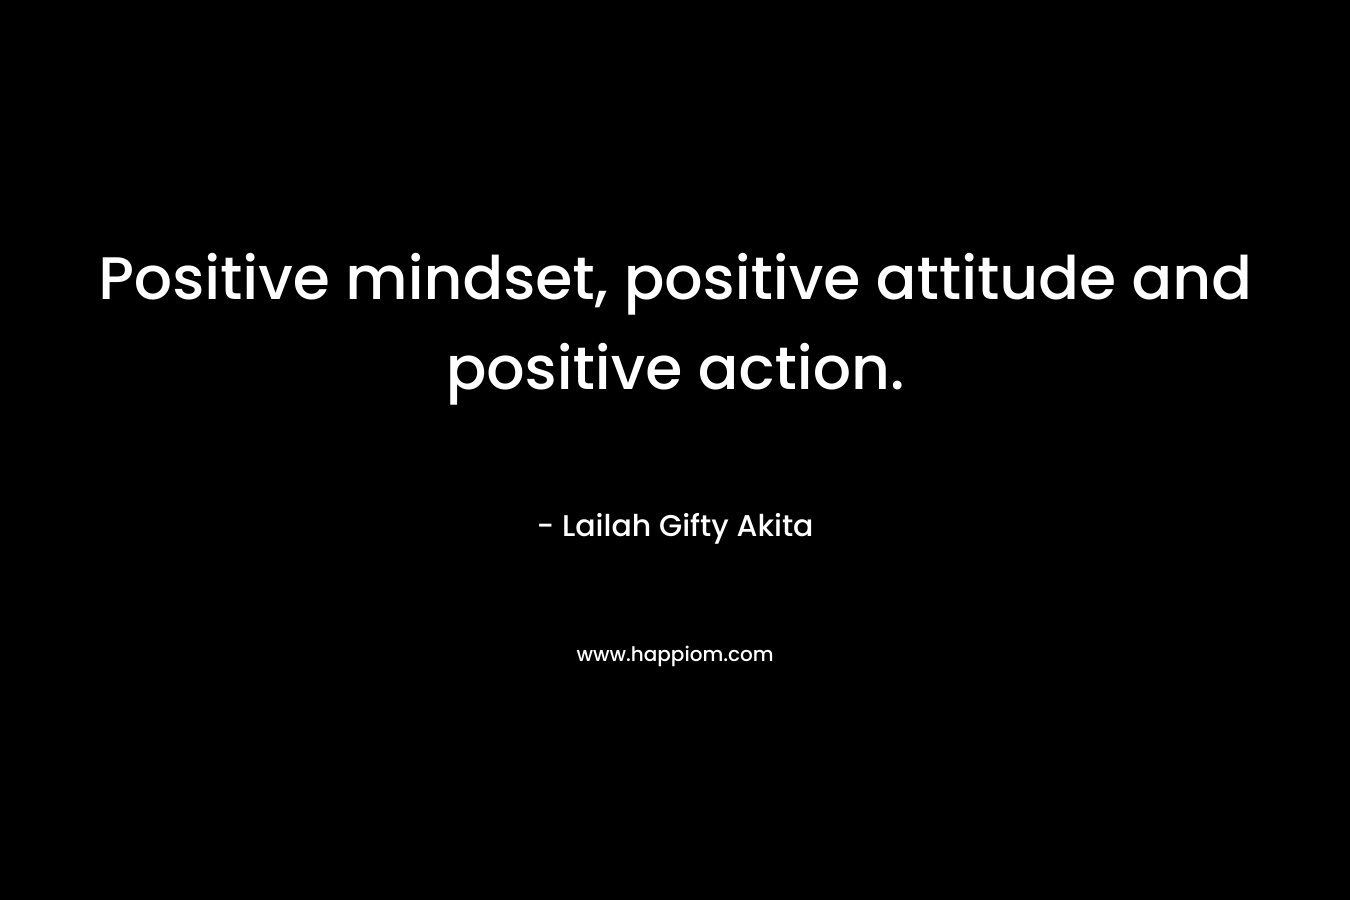 Positive mindset, positive attitude and positive action.